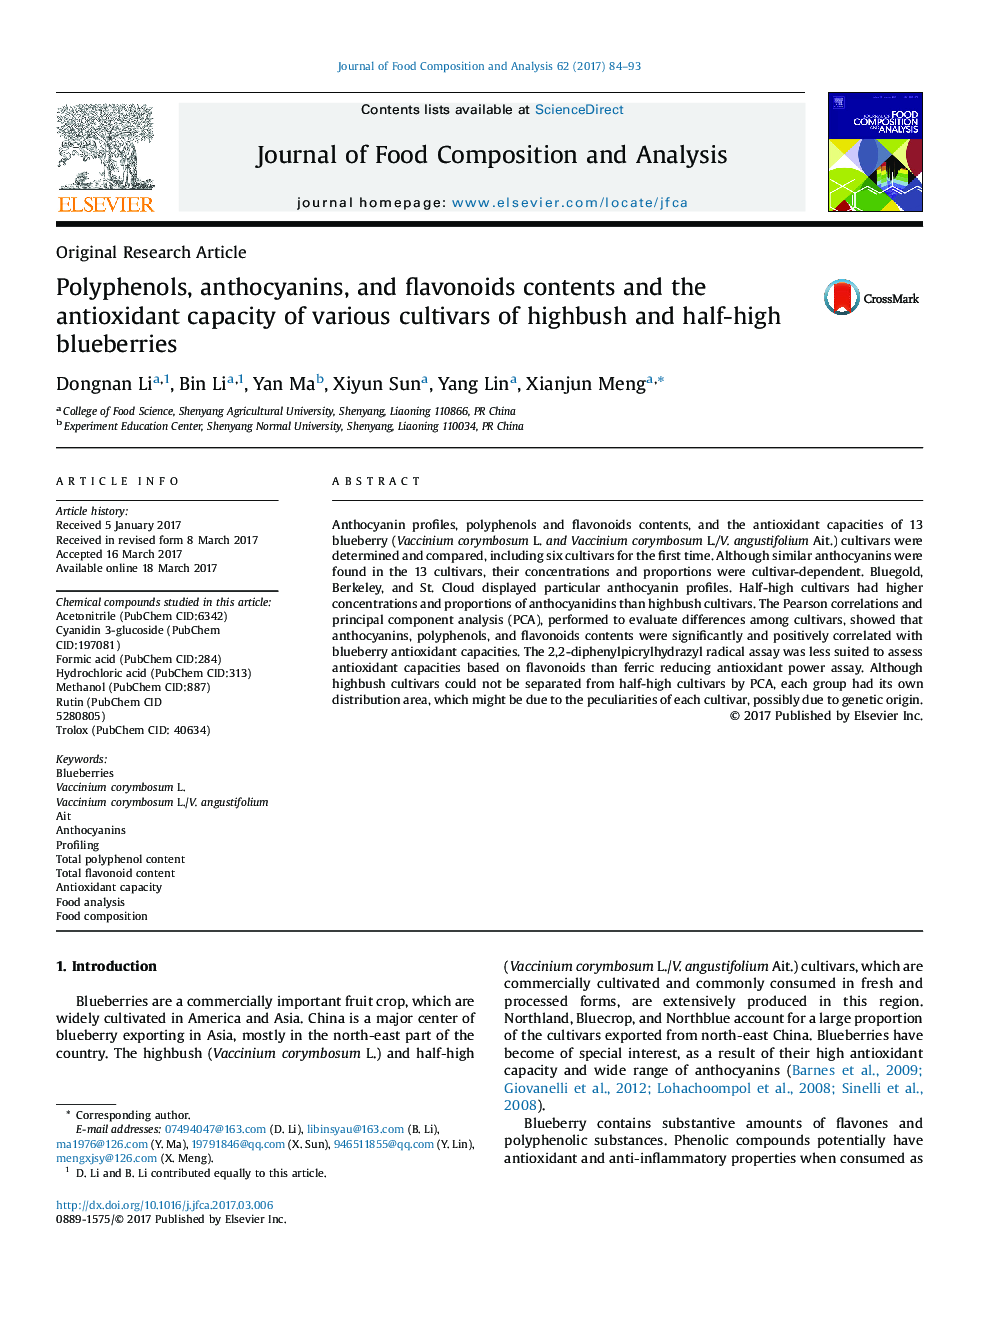 Original Research ArticlePolyphenols, anthocyanins, and flavonoids contents and the antioxidant capacity of various cultivars of highbush and half-high blueberries